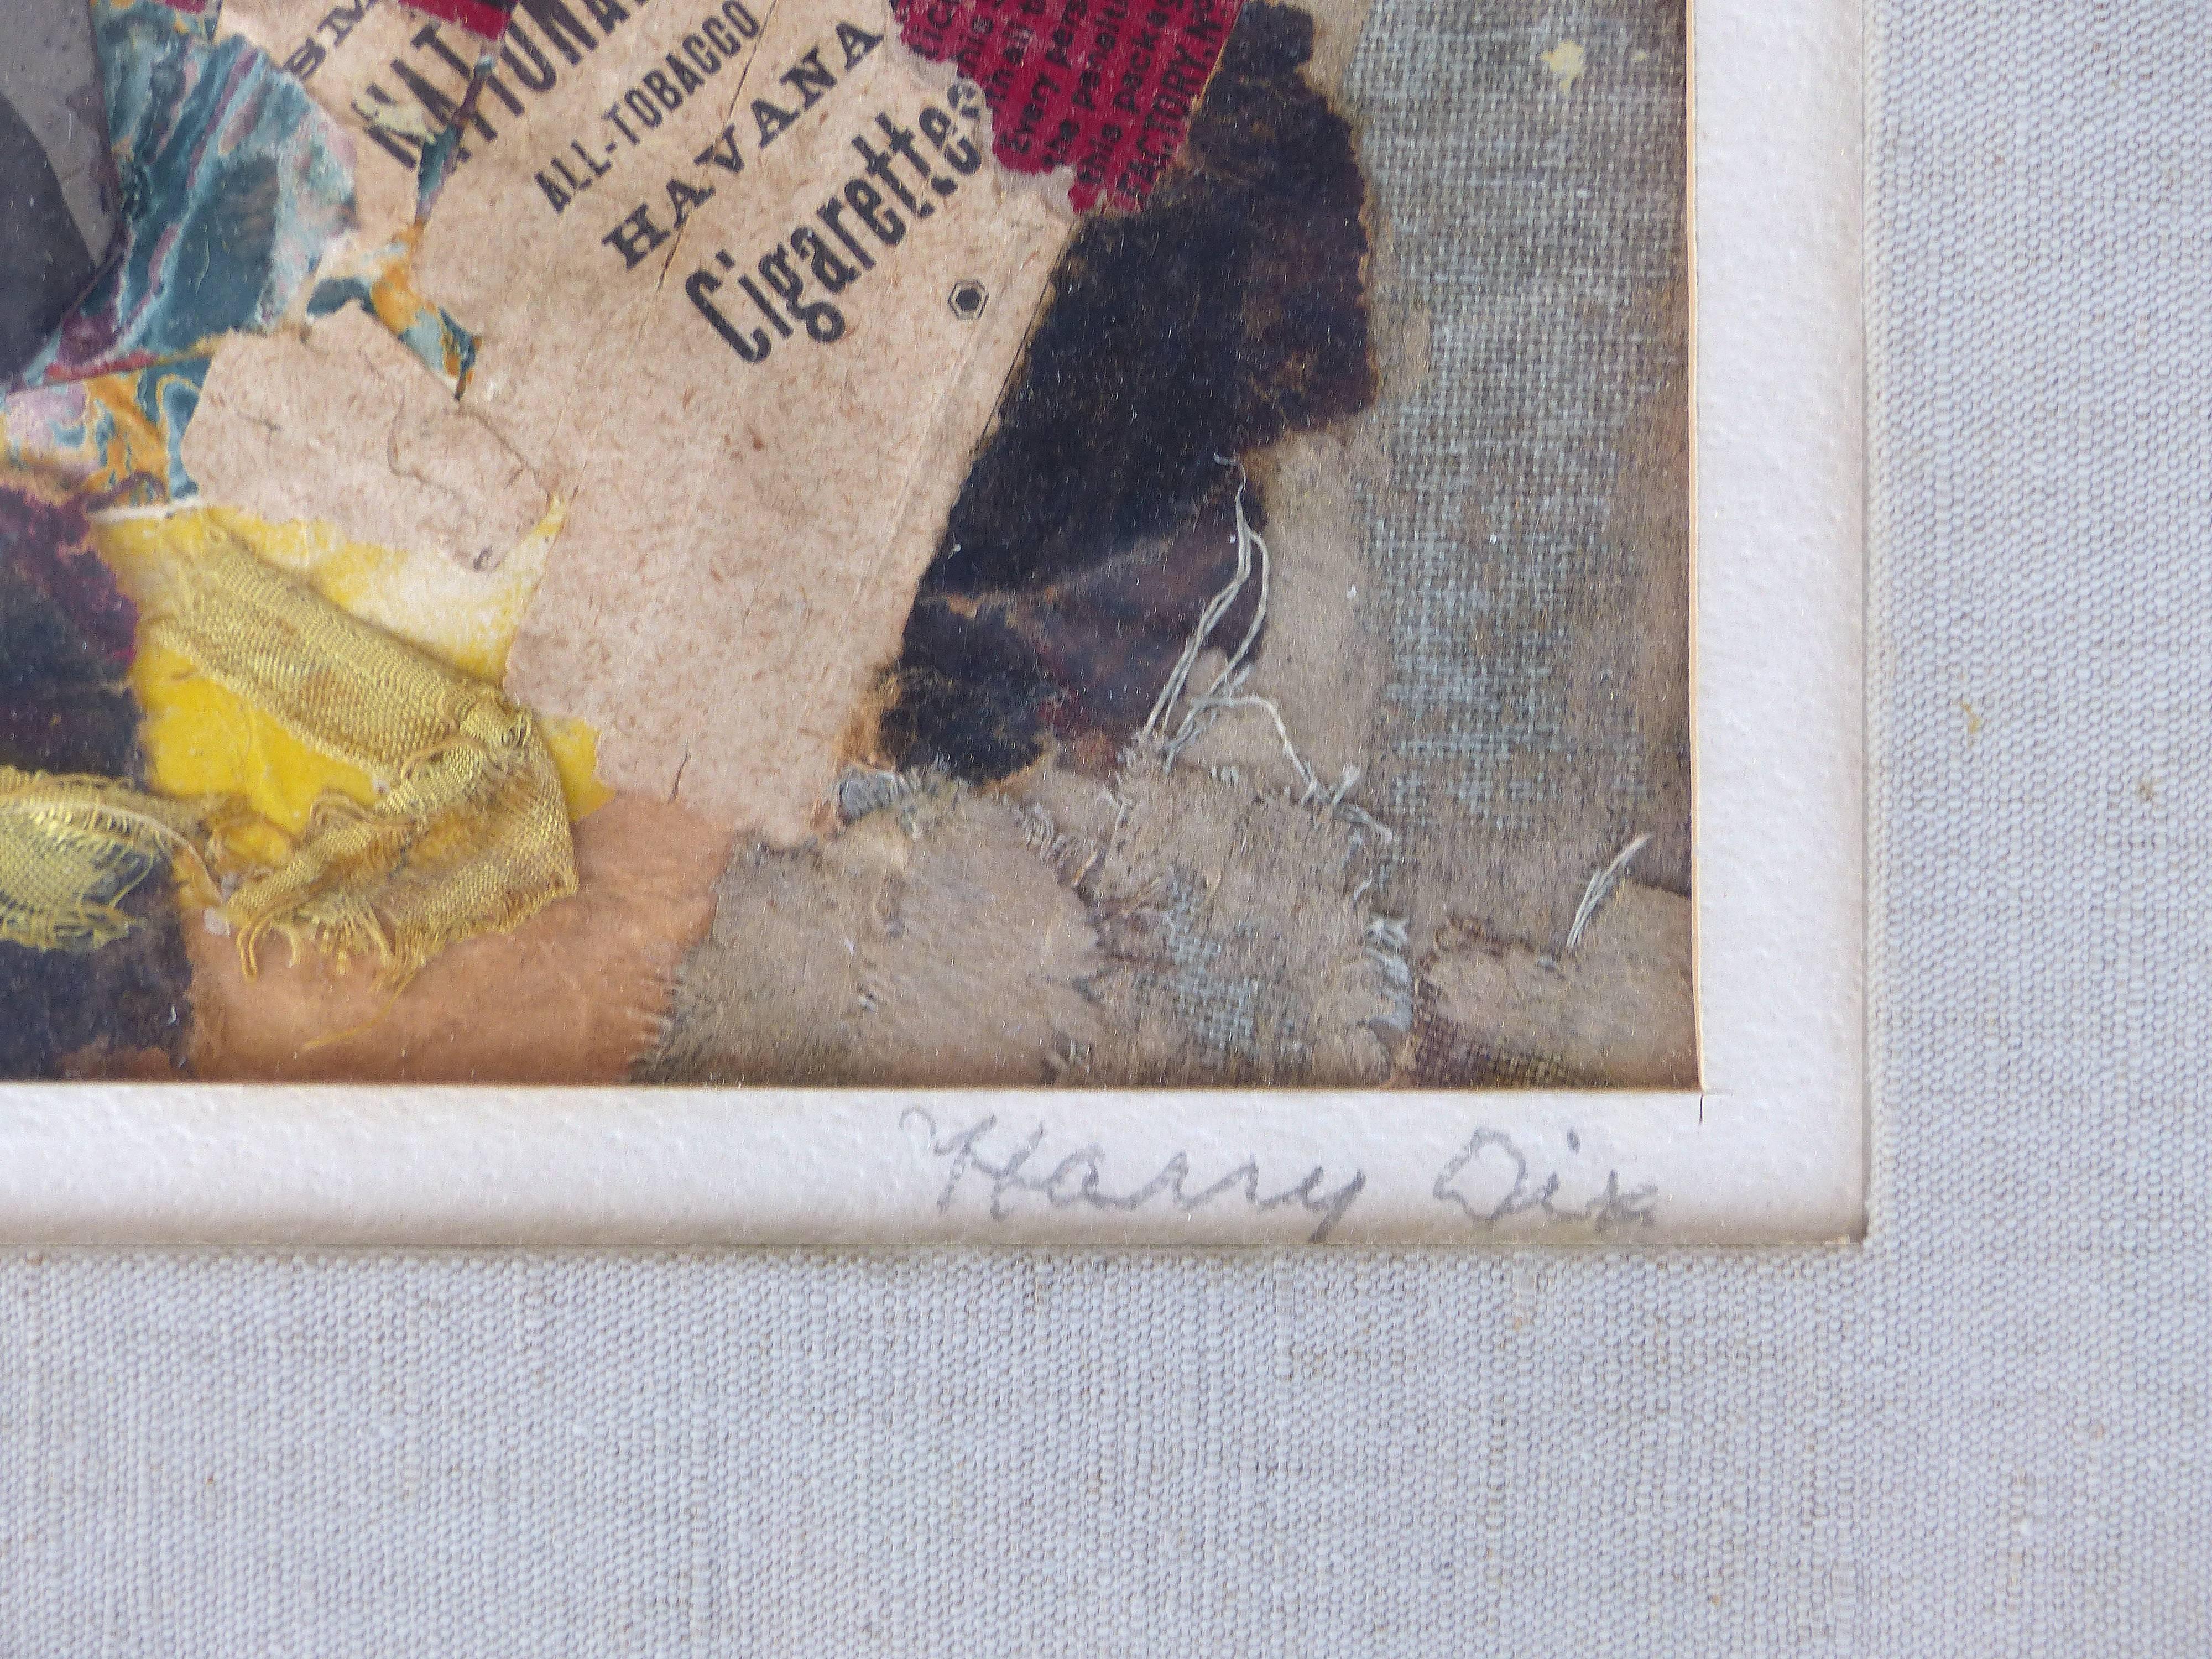 Fabric Collage with Tintype by American artist Harry Dix